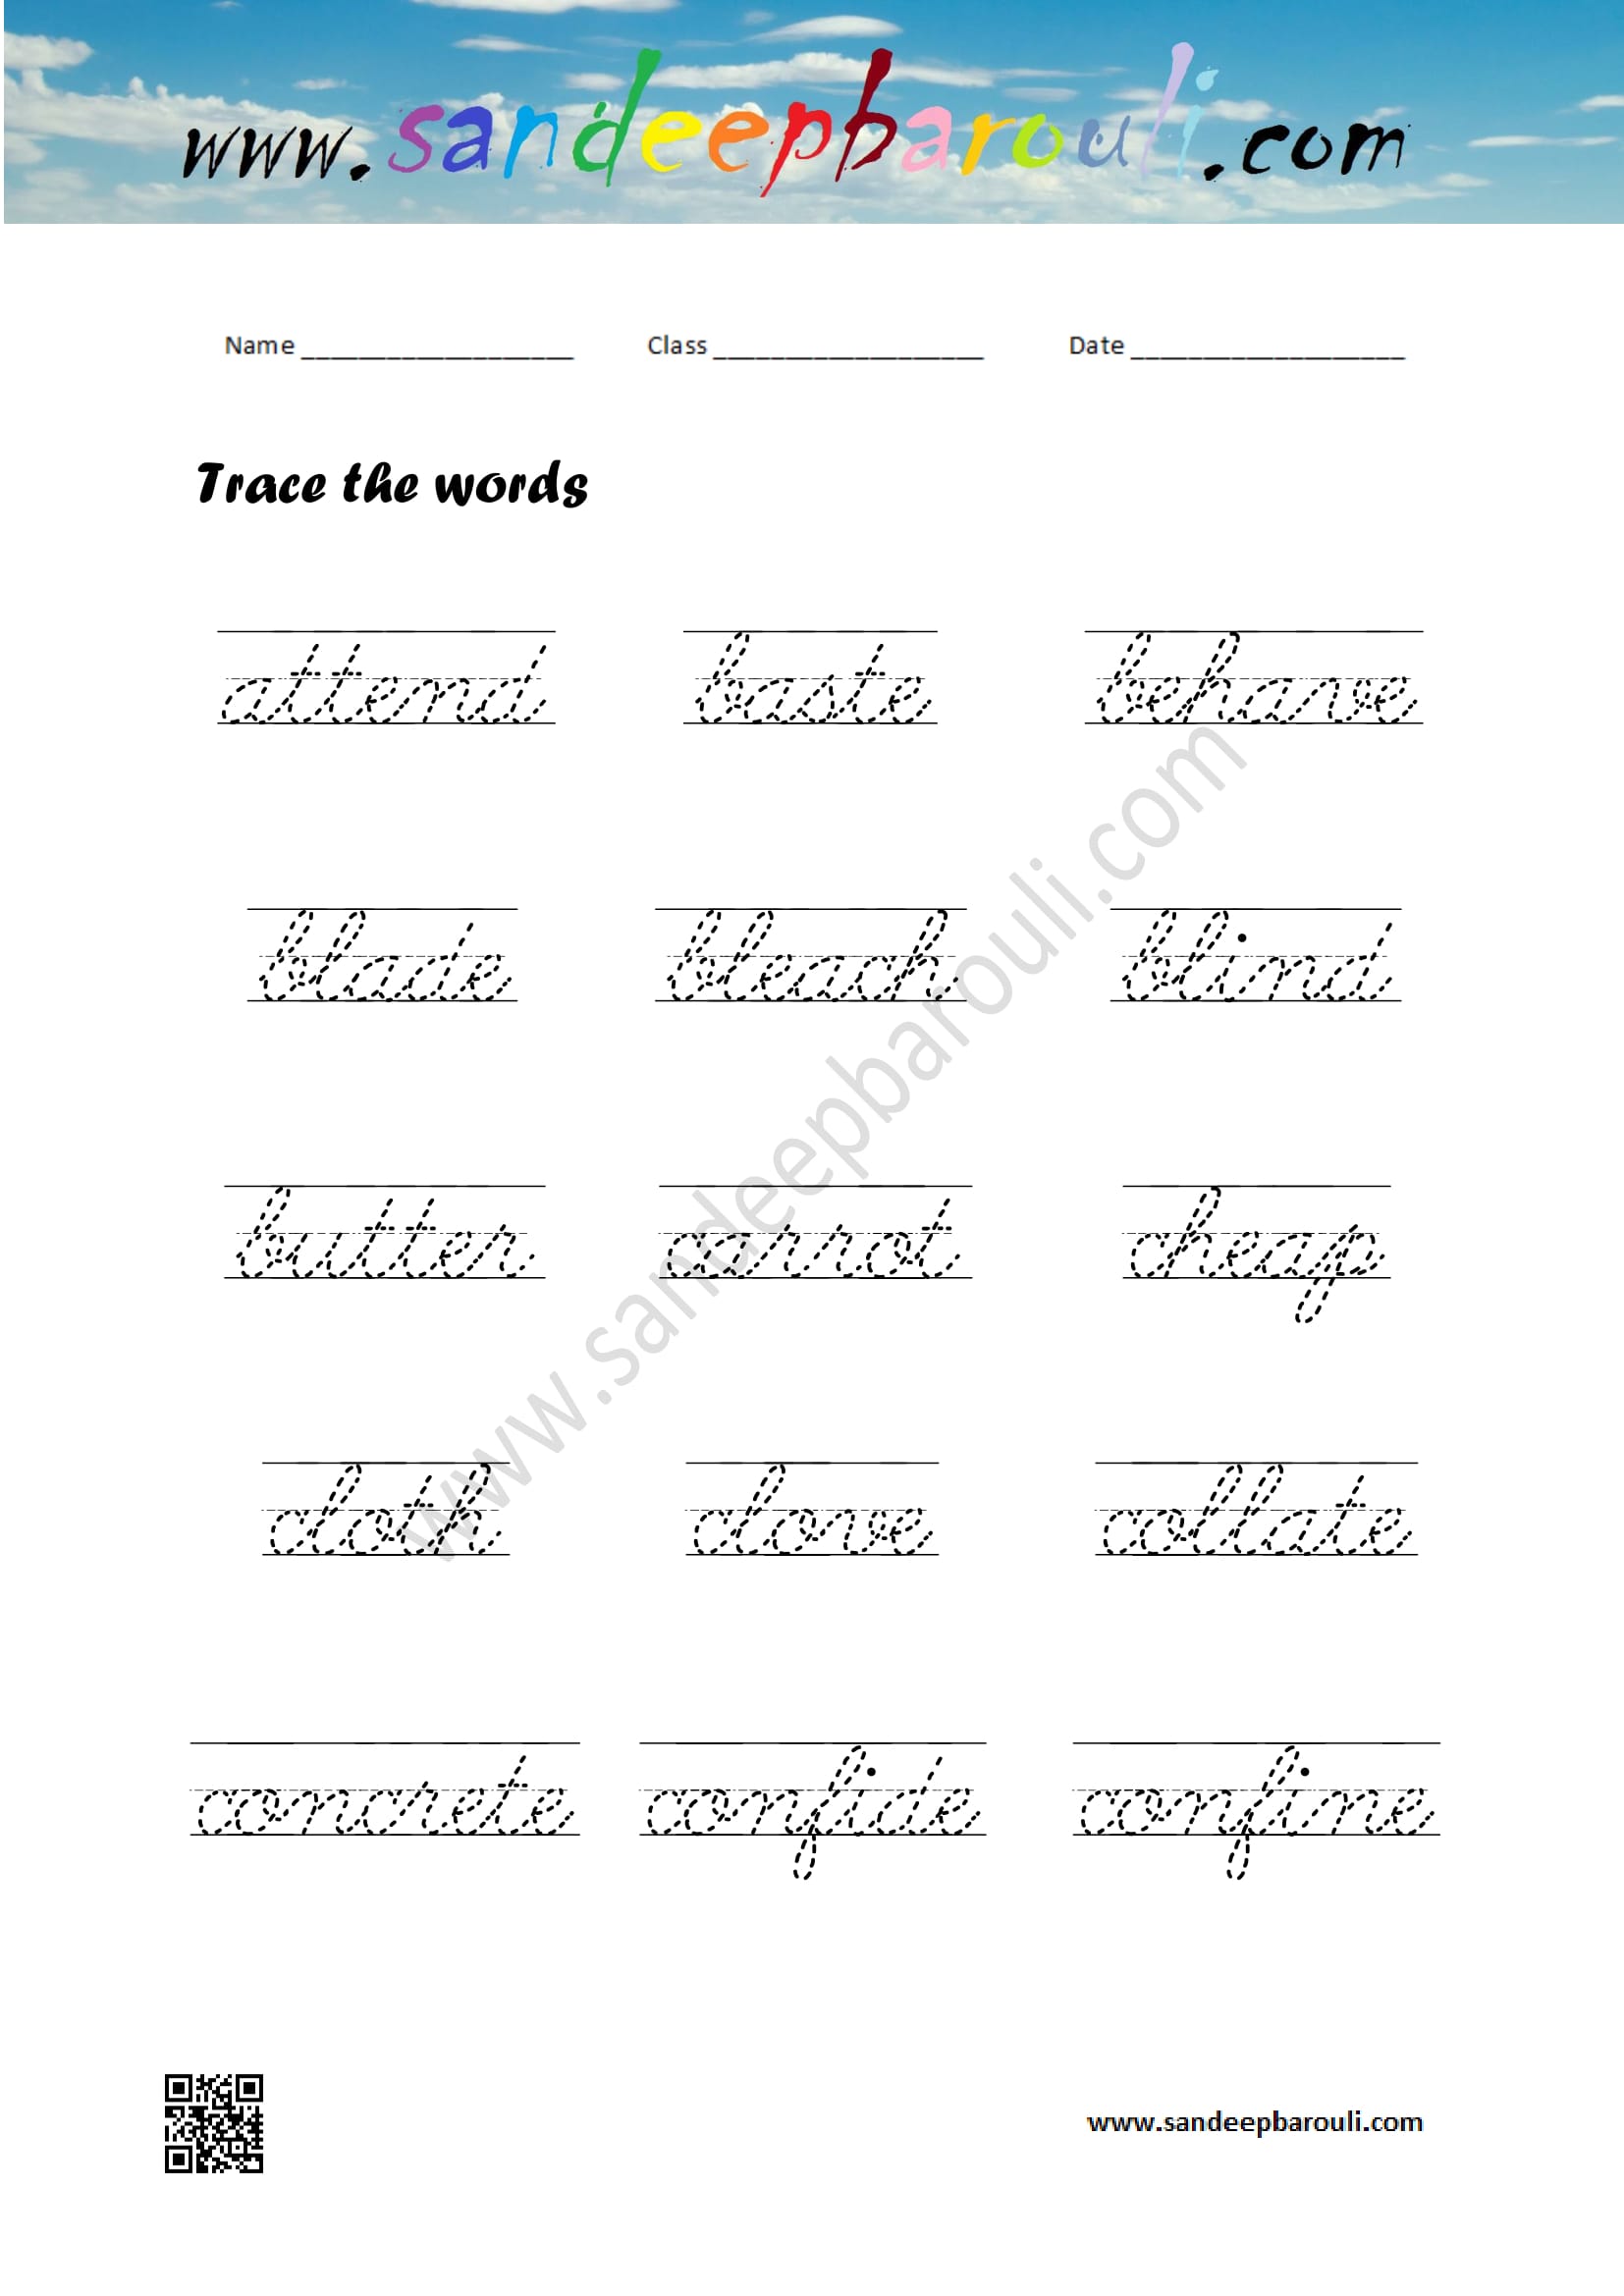 Cursive Writing Worksheet – Trace the words (40)